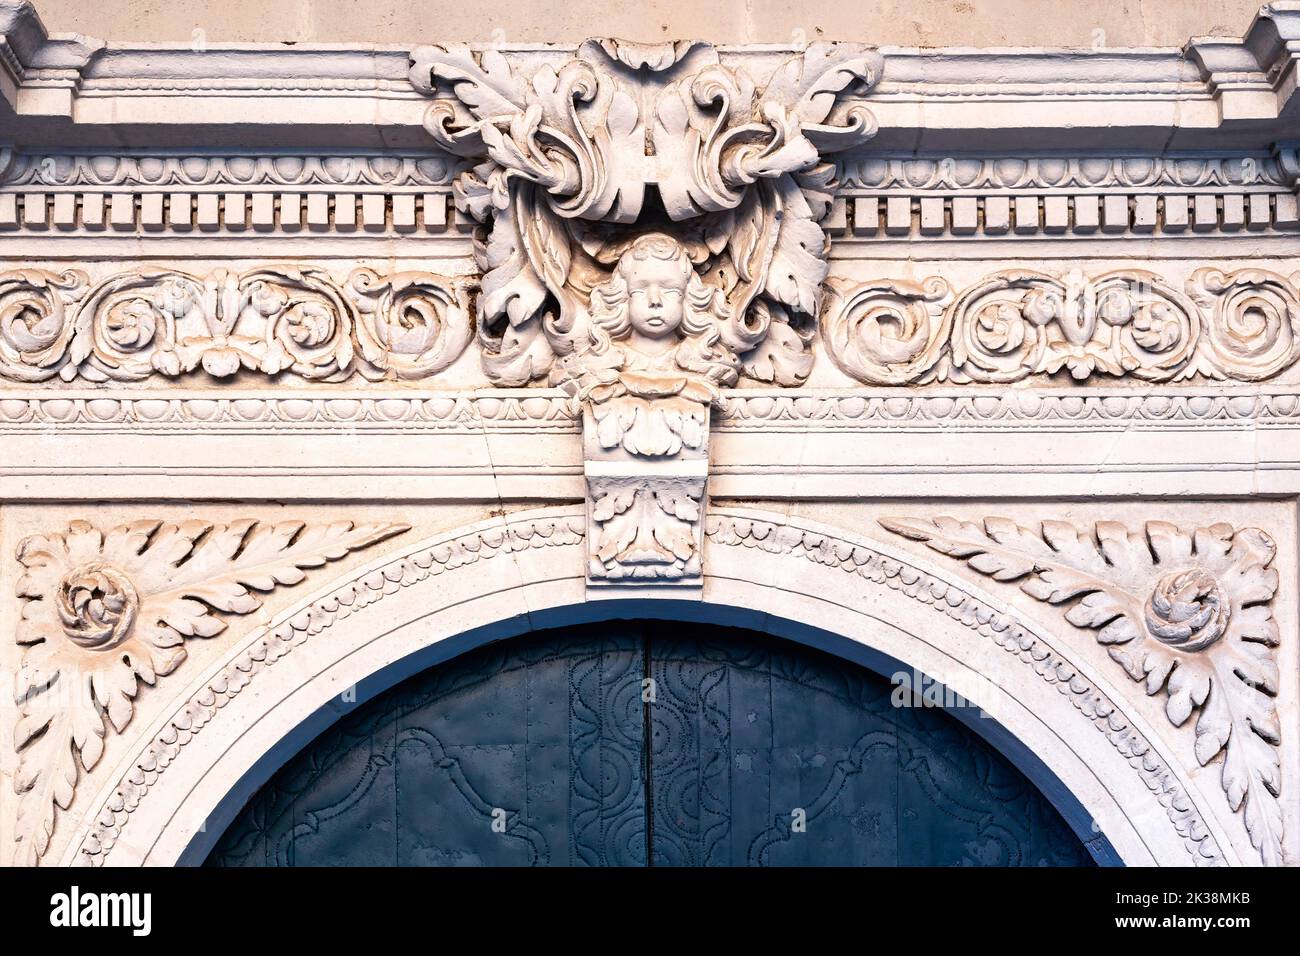 Intricacy of stone carvings decorating the walls of the medieval building. Stock Photo